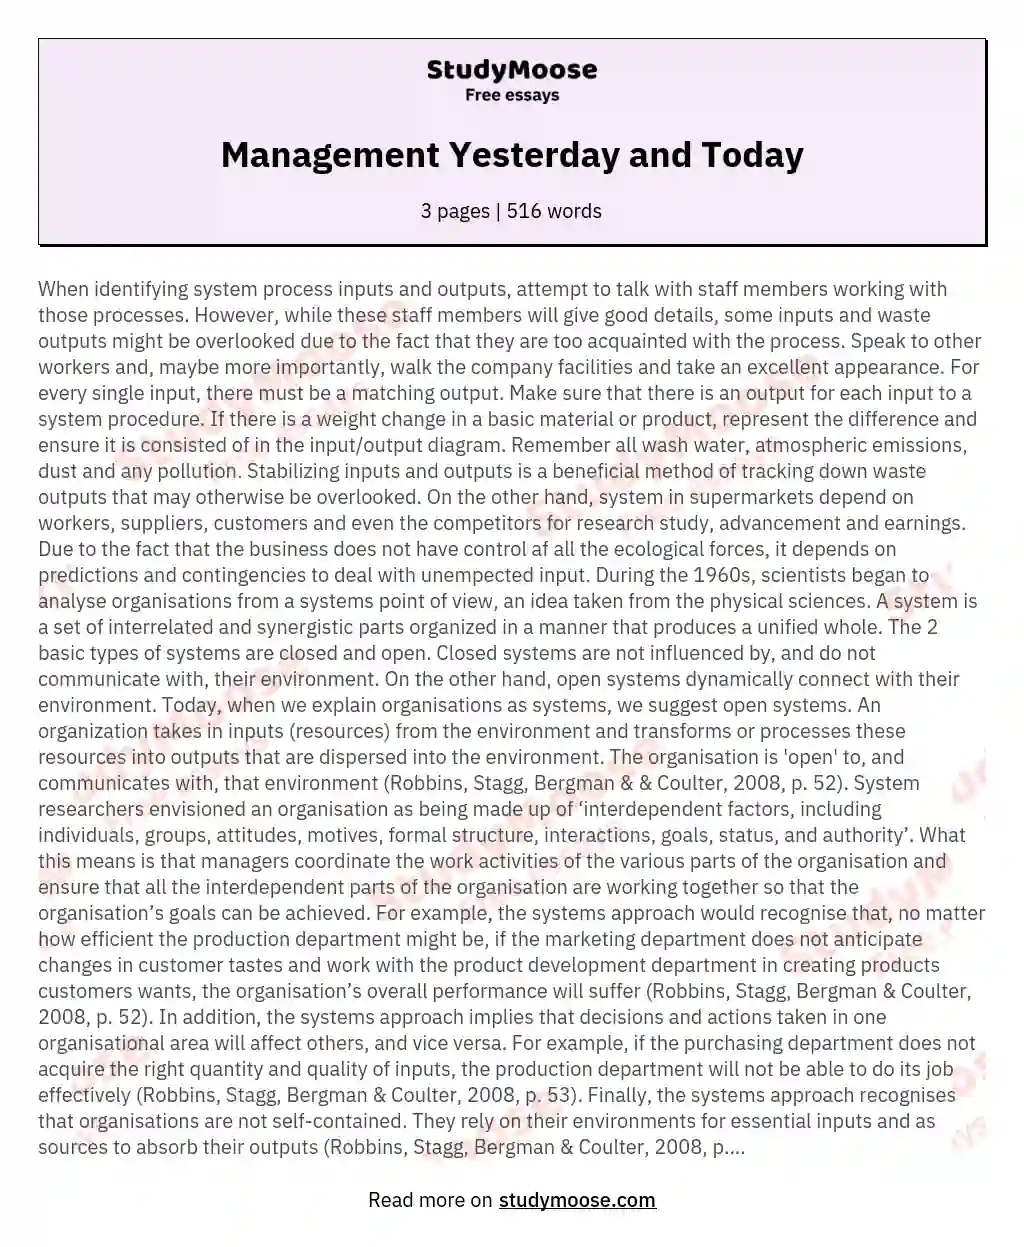 Management Yesterday and Today essay